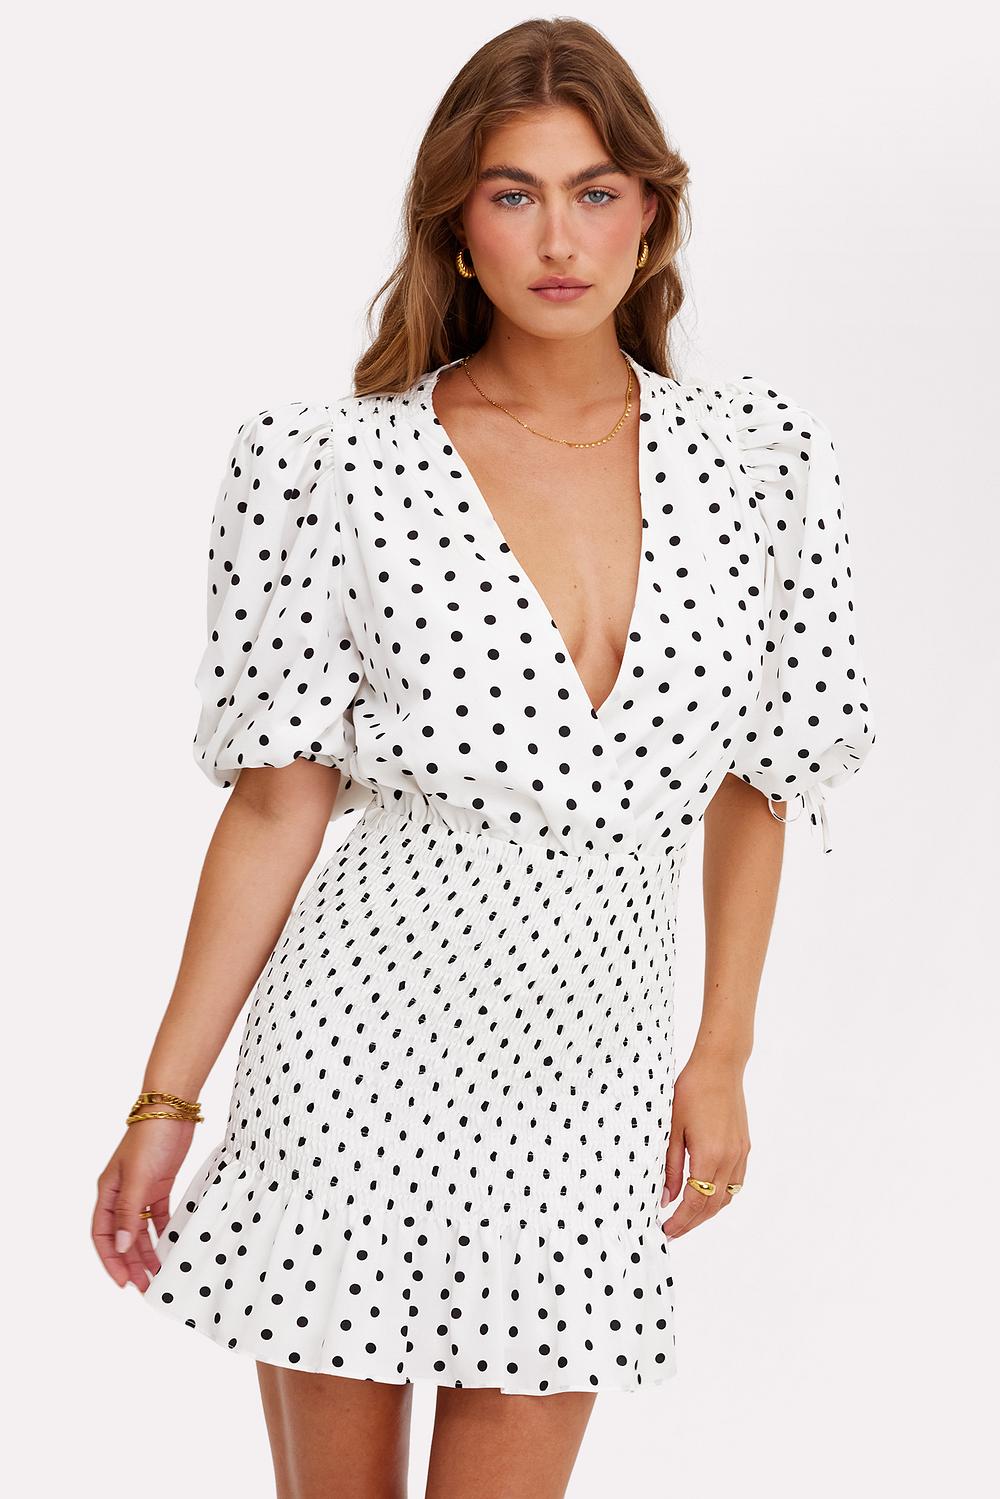 White dress with dots